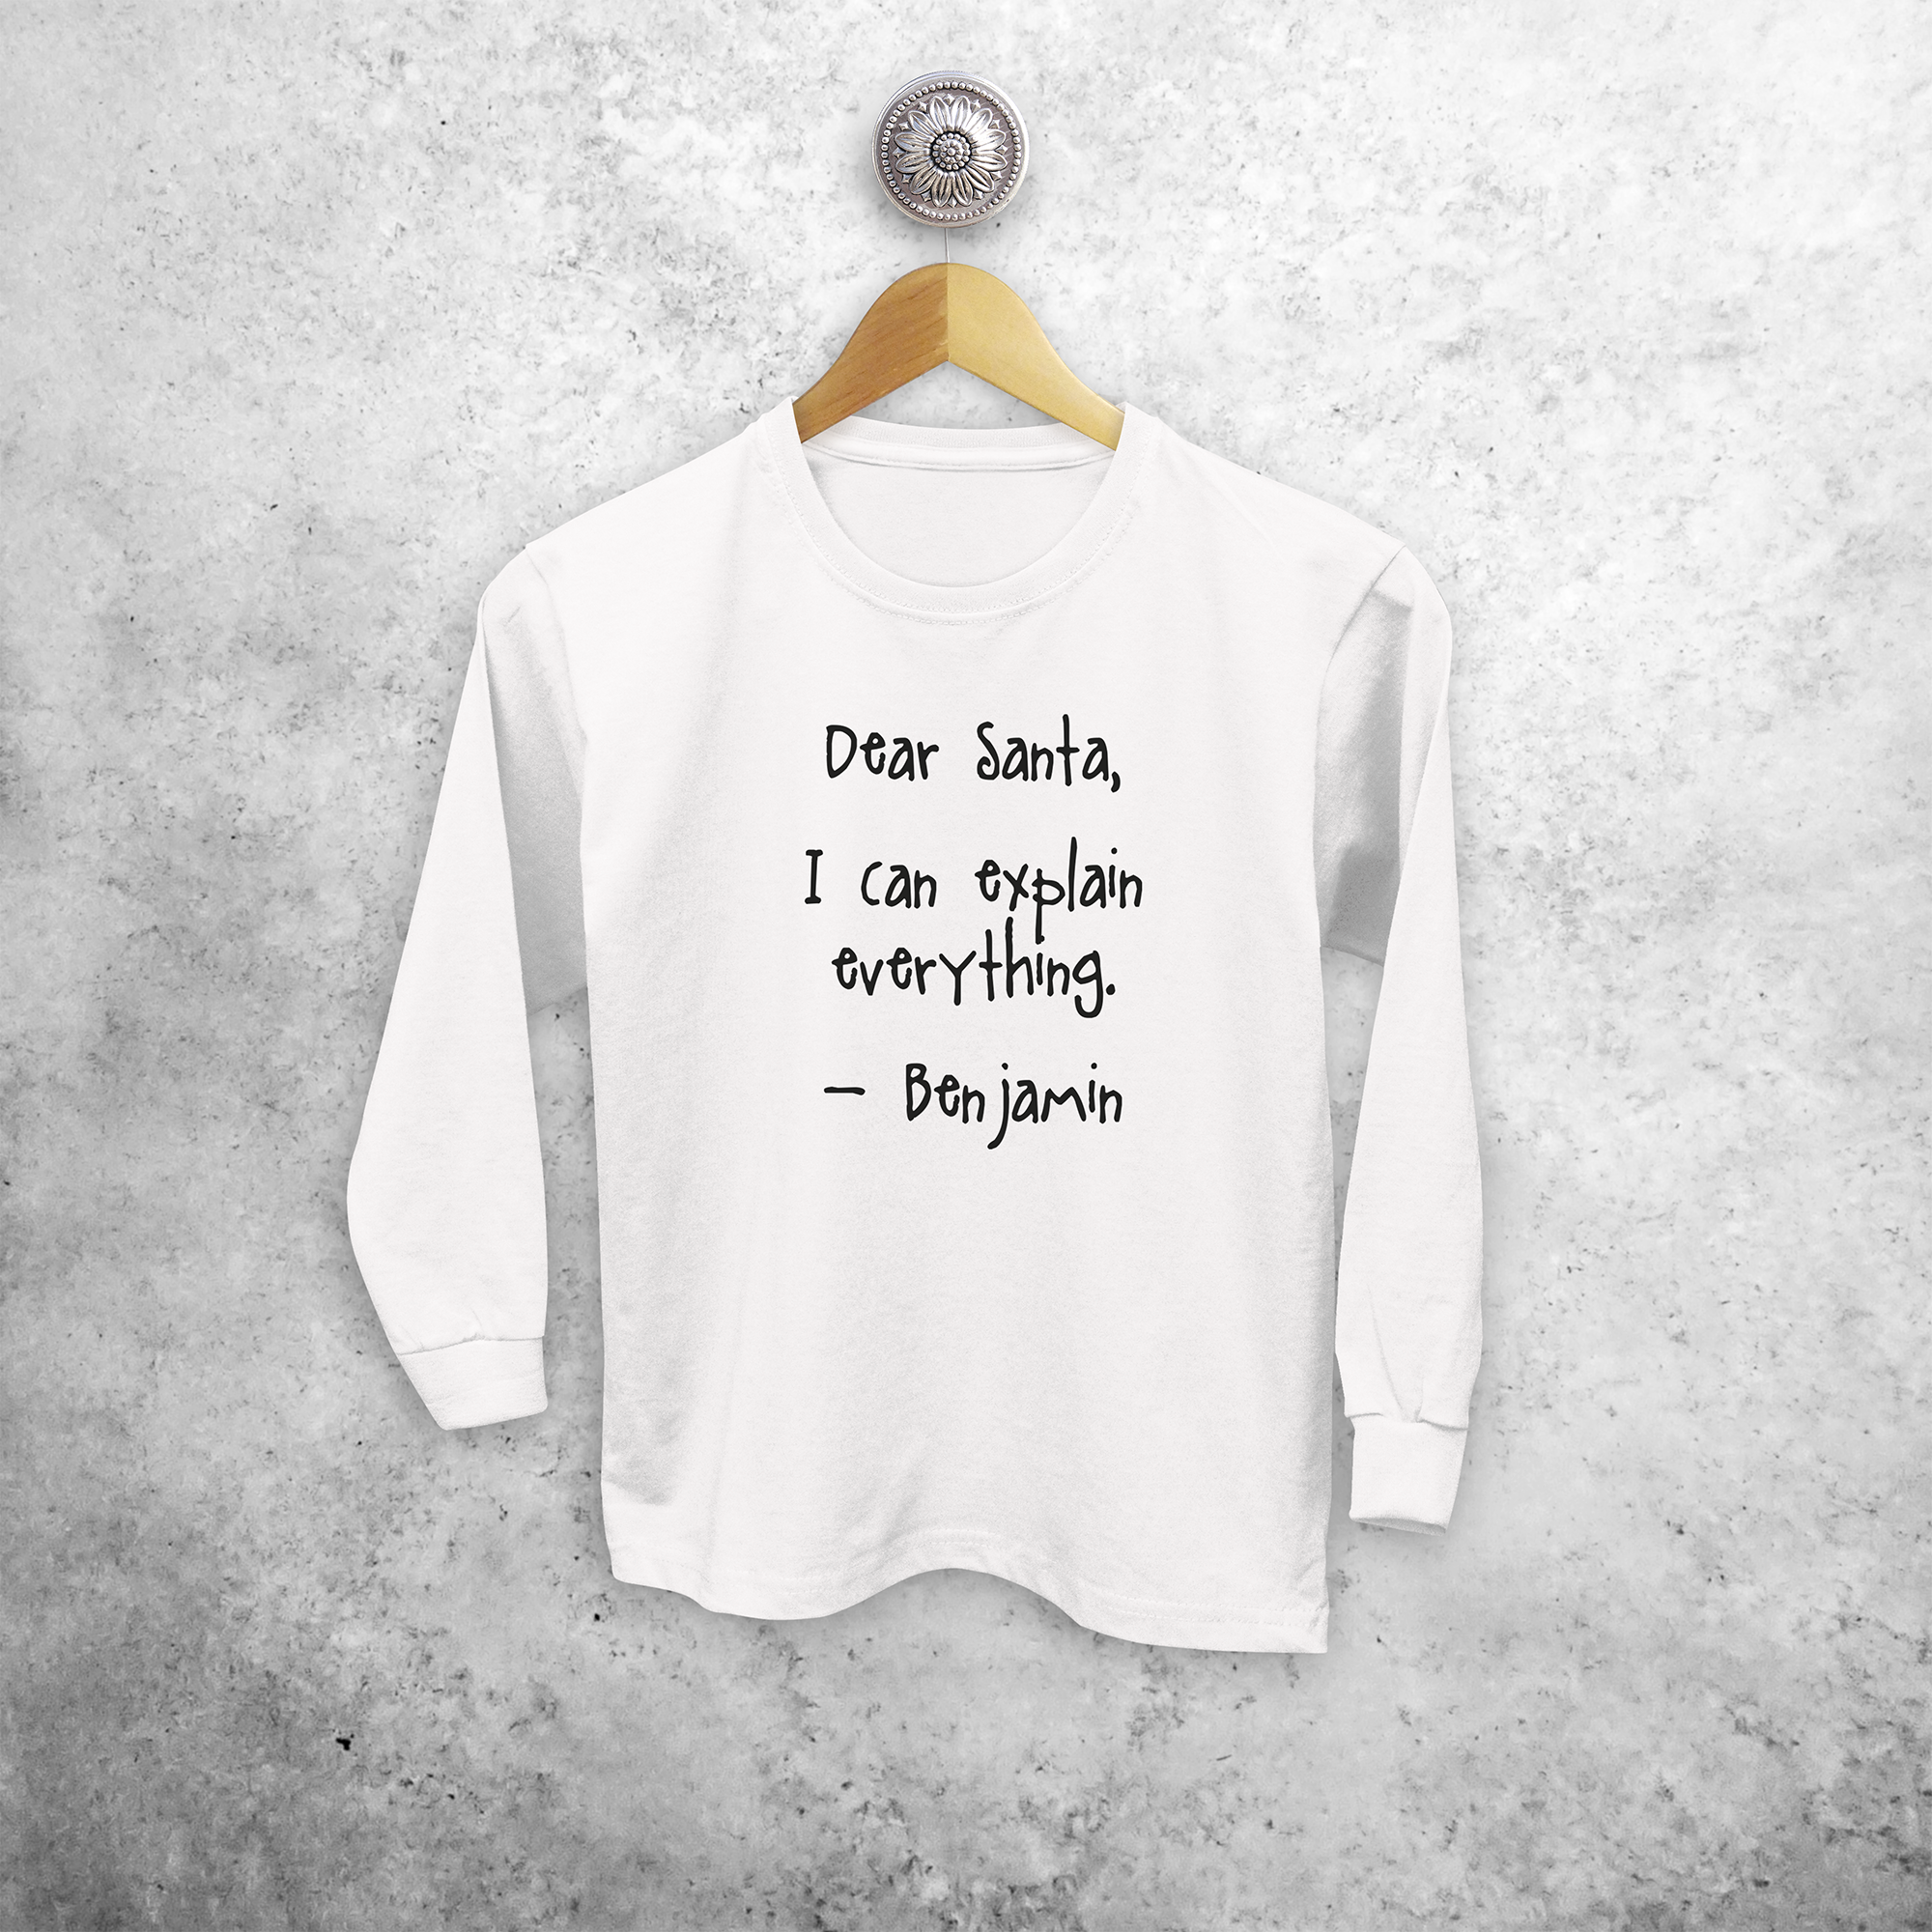 Kids shirt with long sleeves, with ‘Santa, I can explain everything’ print by KMLeon.